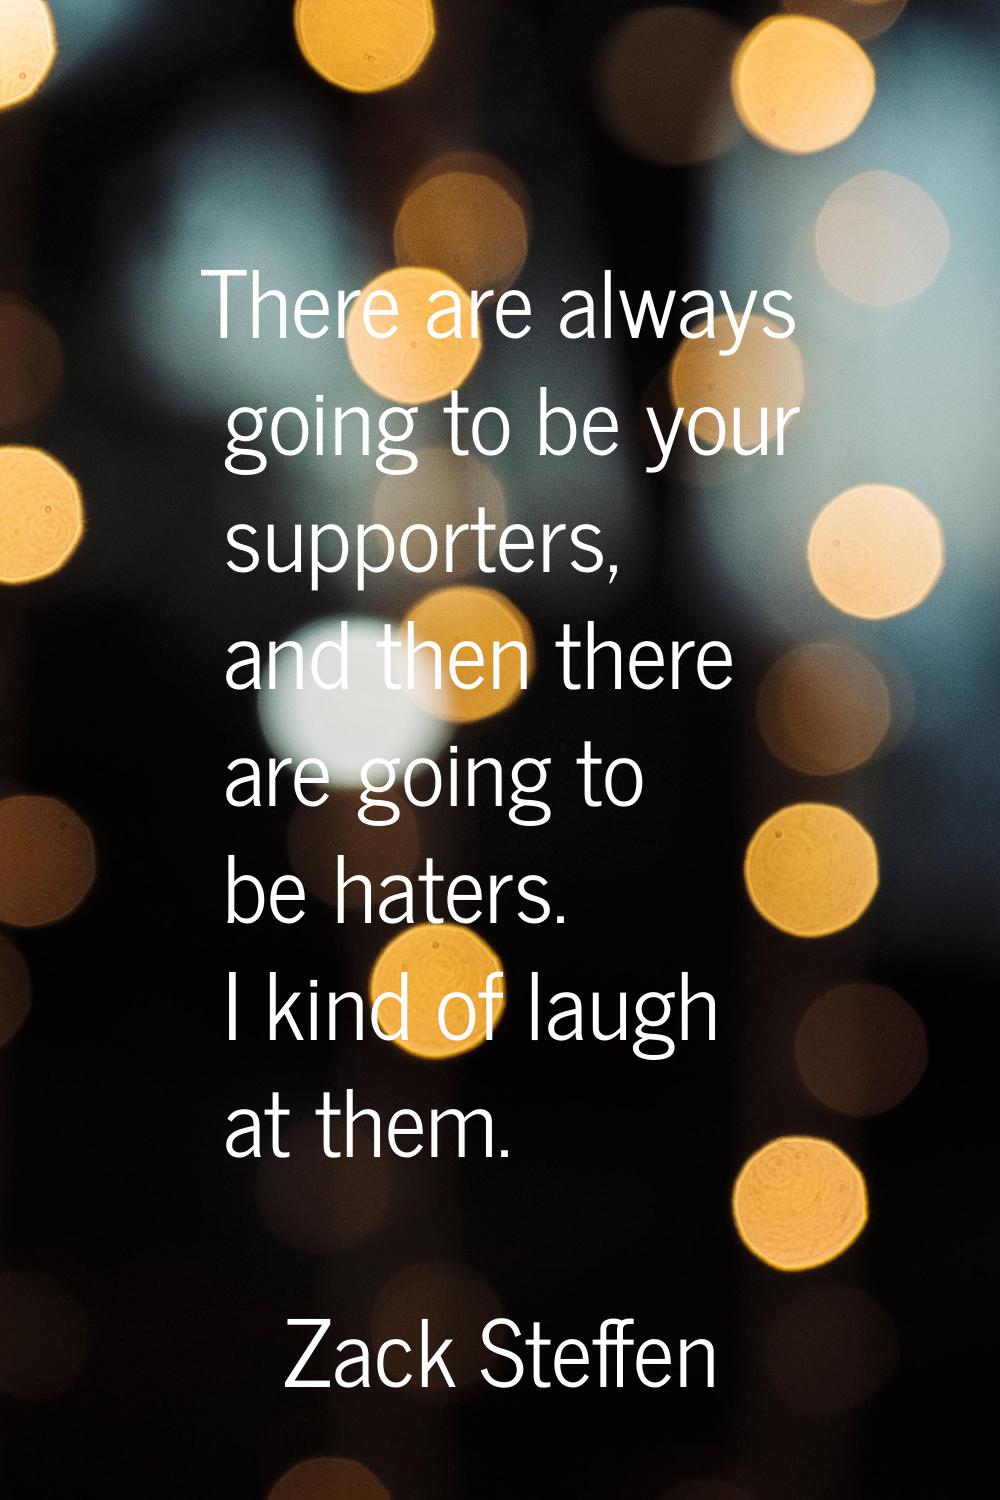 There are always going to be your supporters, and then there are going to be haters. I kind of laug